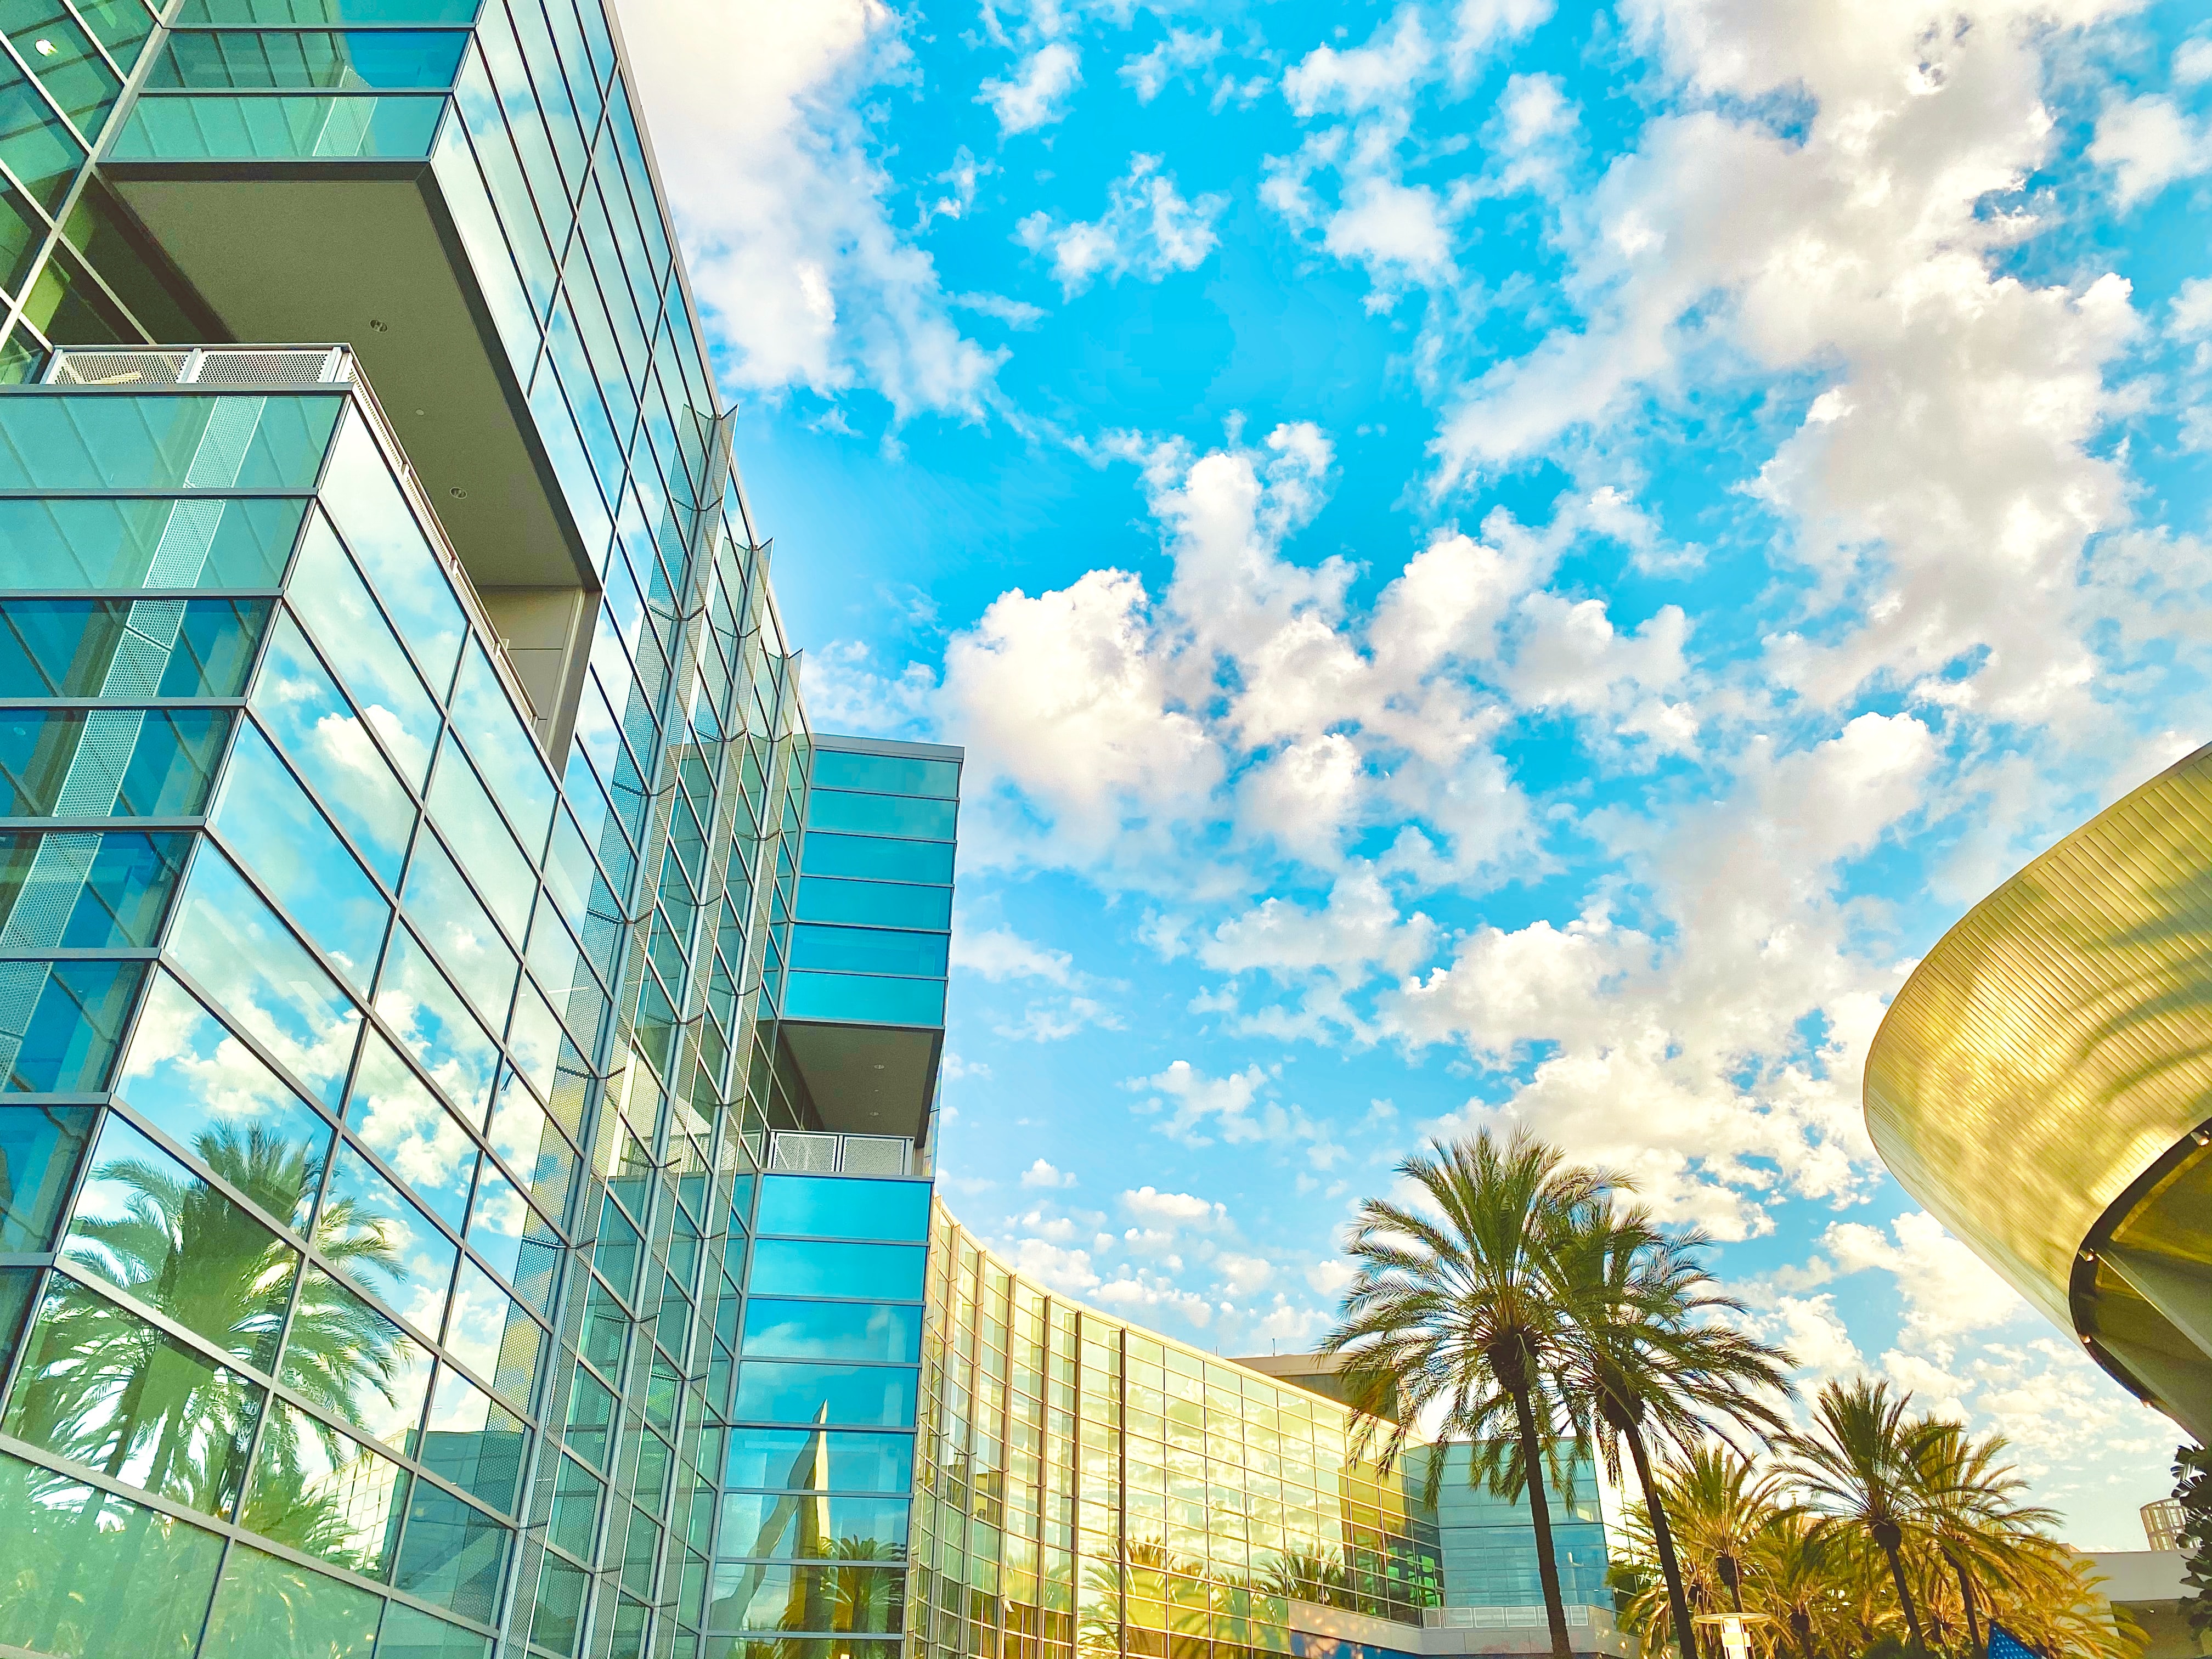 An image of the Anaheim Convention Center is shown with a blue sky and clouds and palm trees.